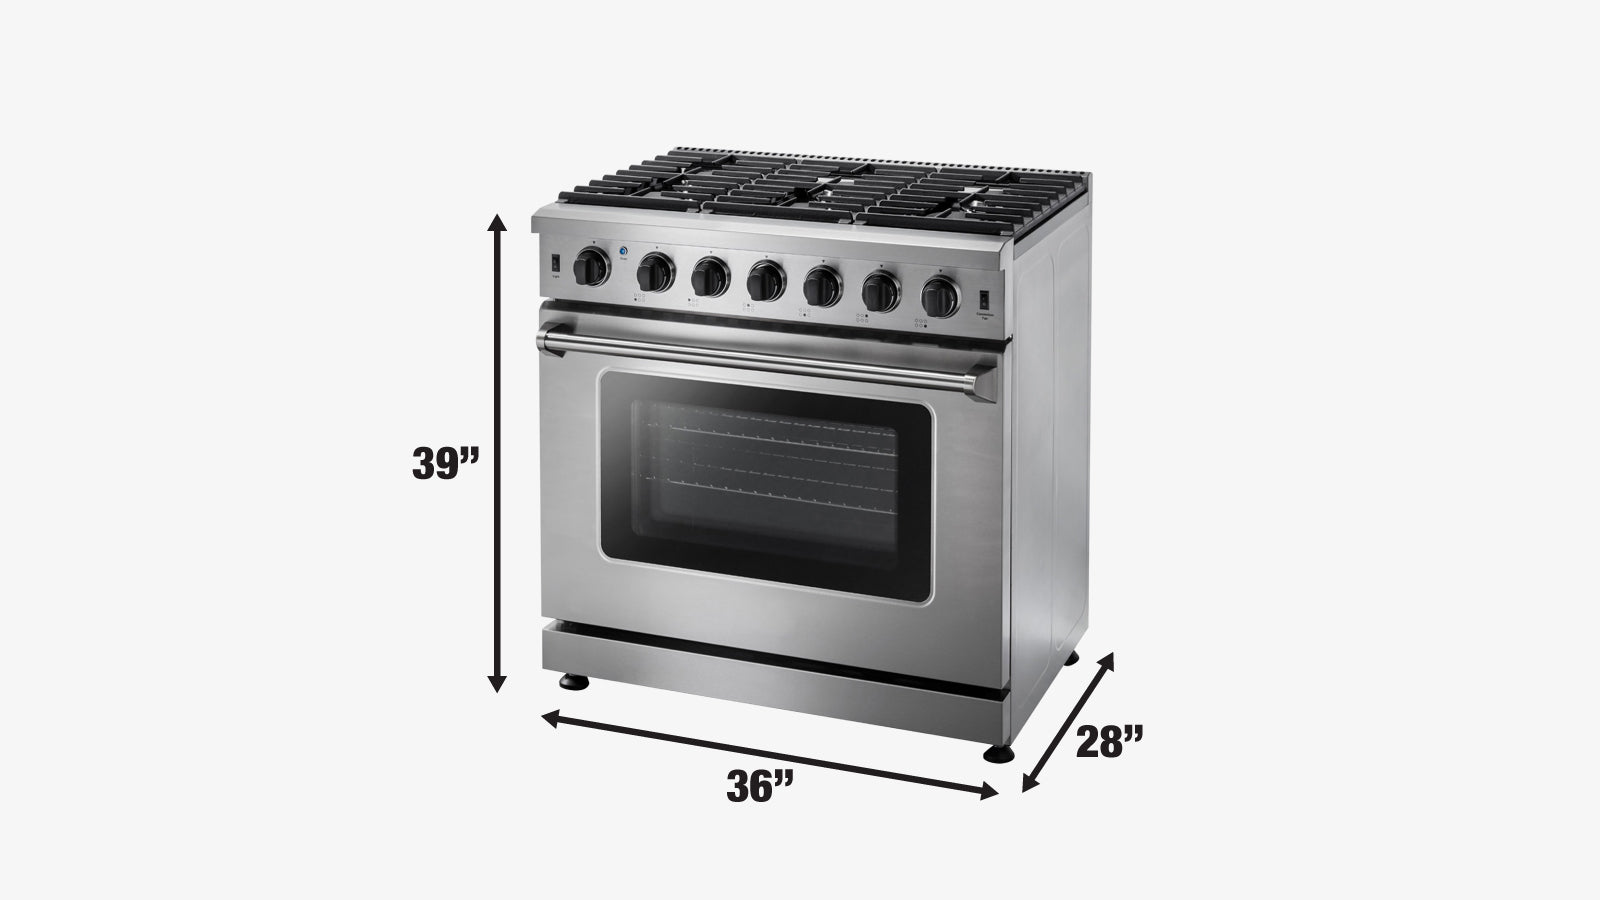 TMG Living Kitchen 36” Freestanding Gas Convection Range, Commercial Convection Fan, 3-Layered Glass Window, 9000-18500 BTU, TMG-HRG36-specifications-image